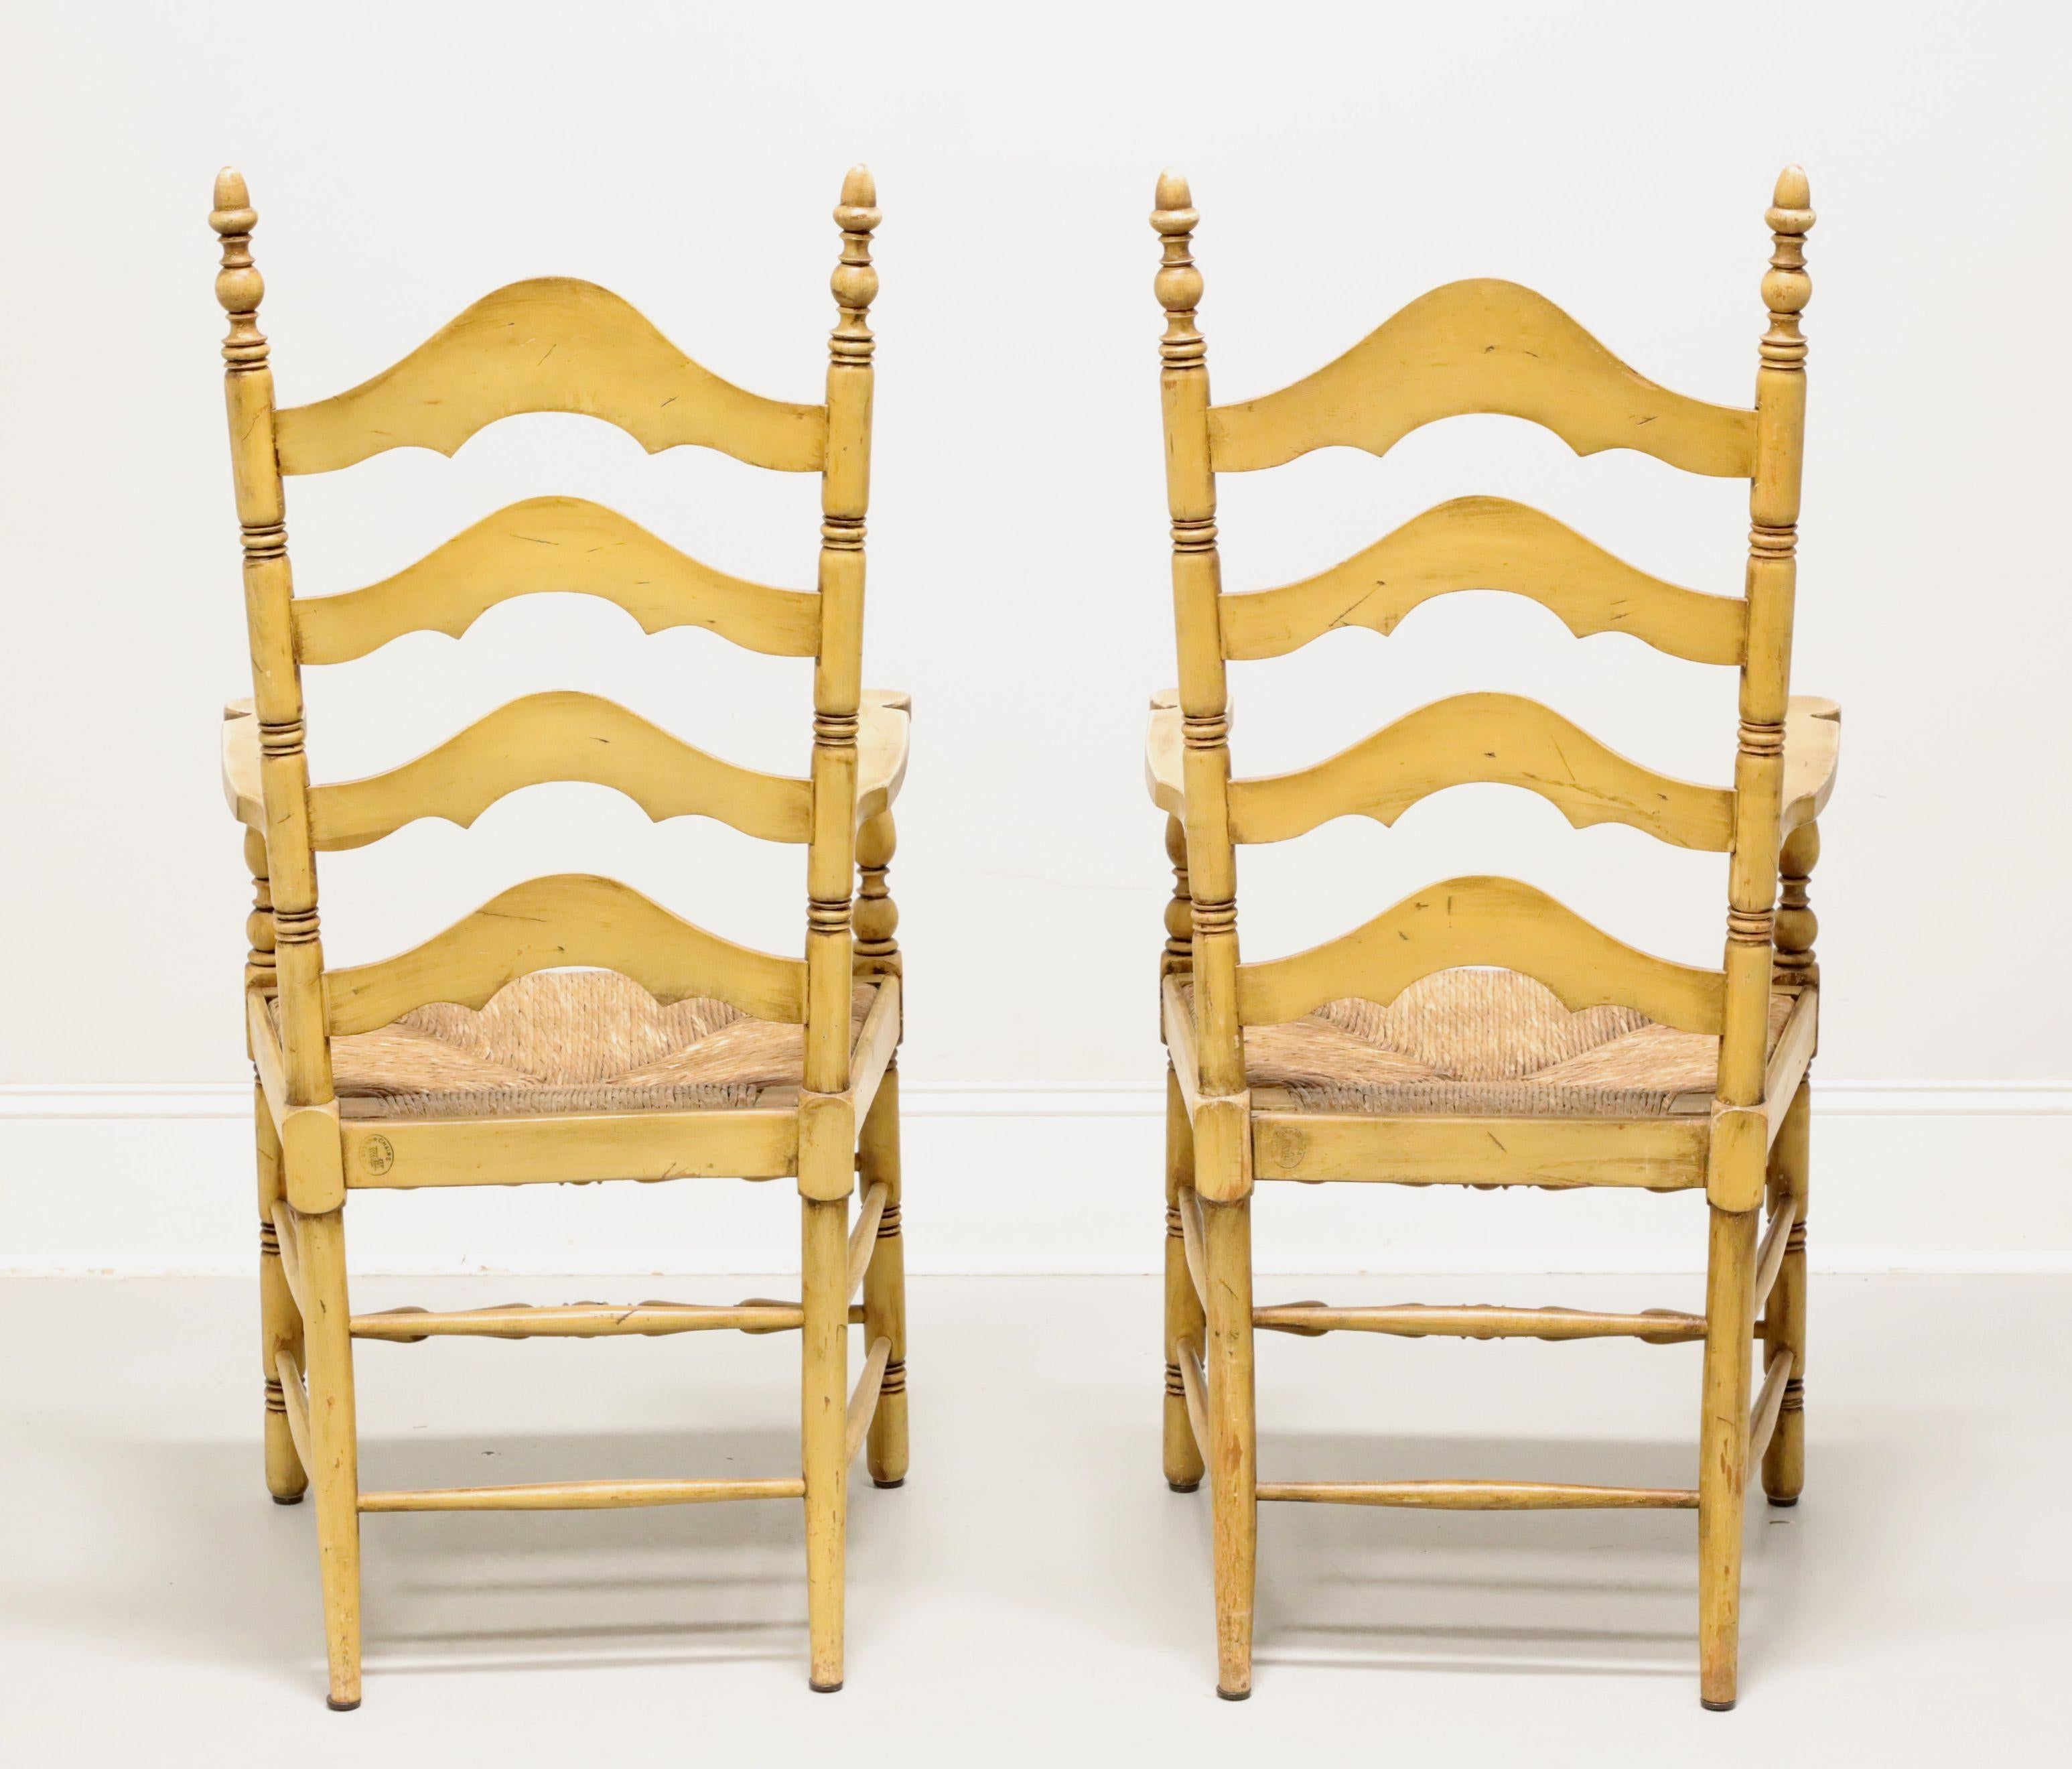 CAPE ANN CHAIRS Maple Ladder Back Dining Armchairs with Rush Seats - Pair In Good Condition For Sale In Charlotte, NC